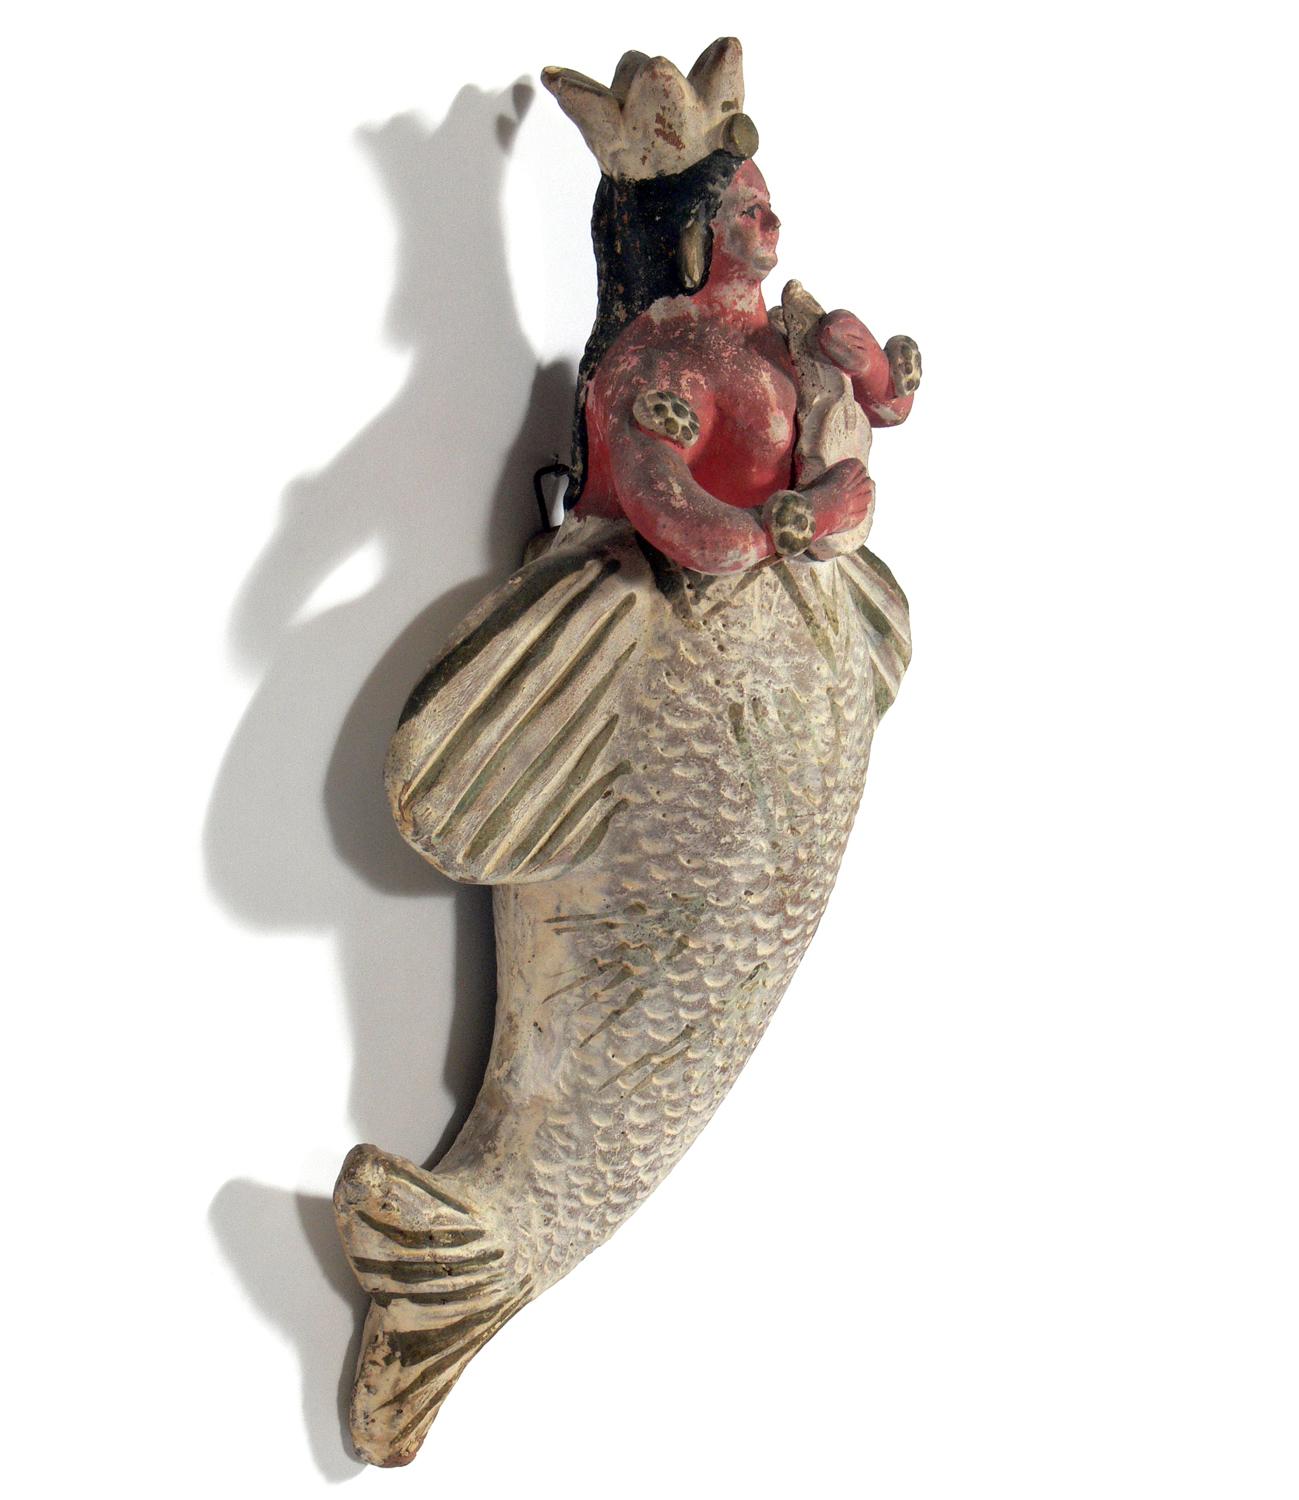 Mexican Folk Art ceramic mermaid, Mexico, circa 1940s-1950s. It retains it's wall hook on the back for easy mounting.